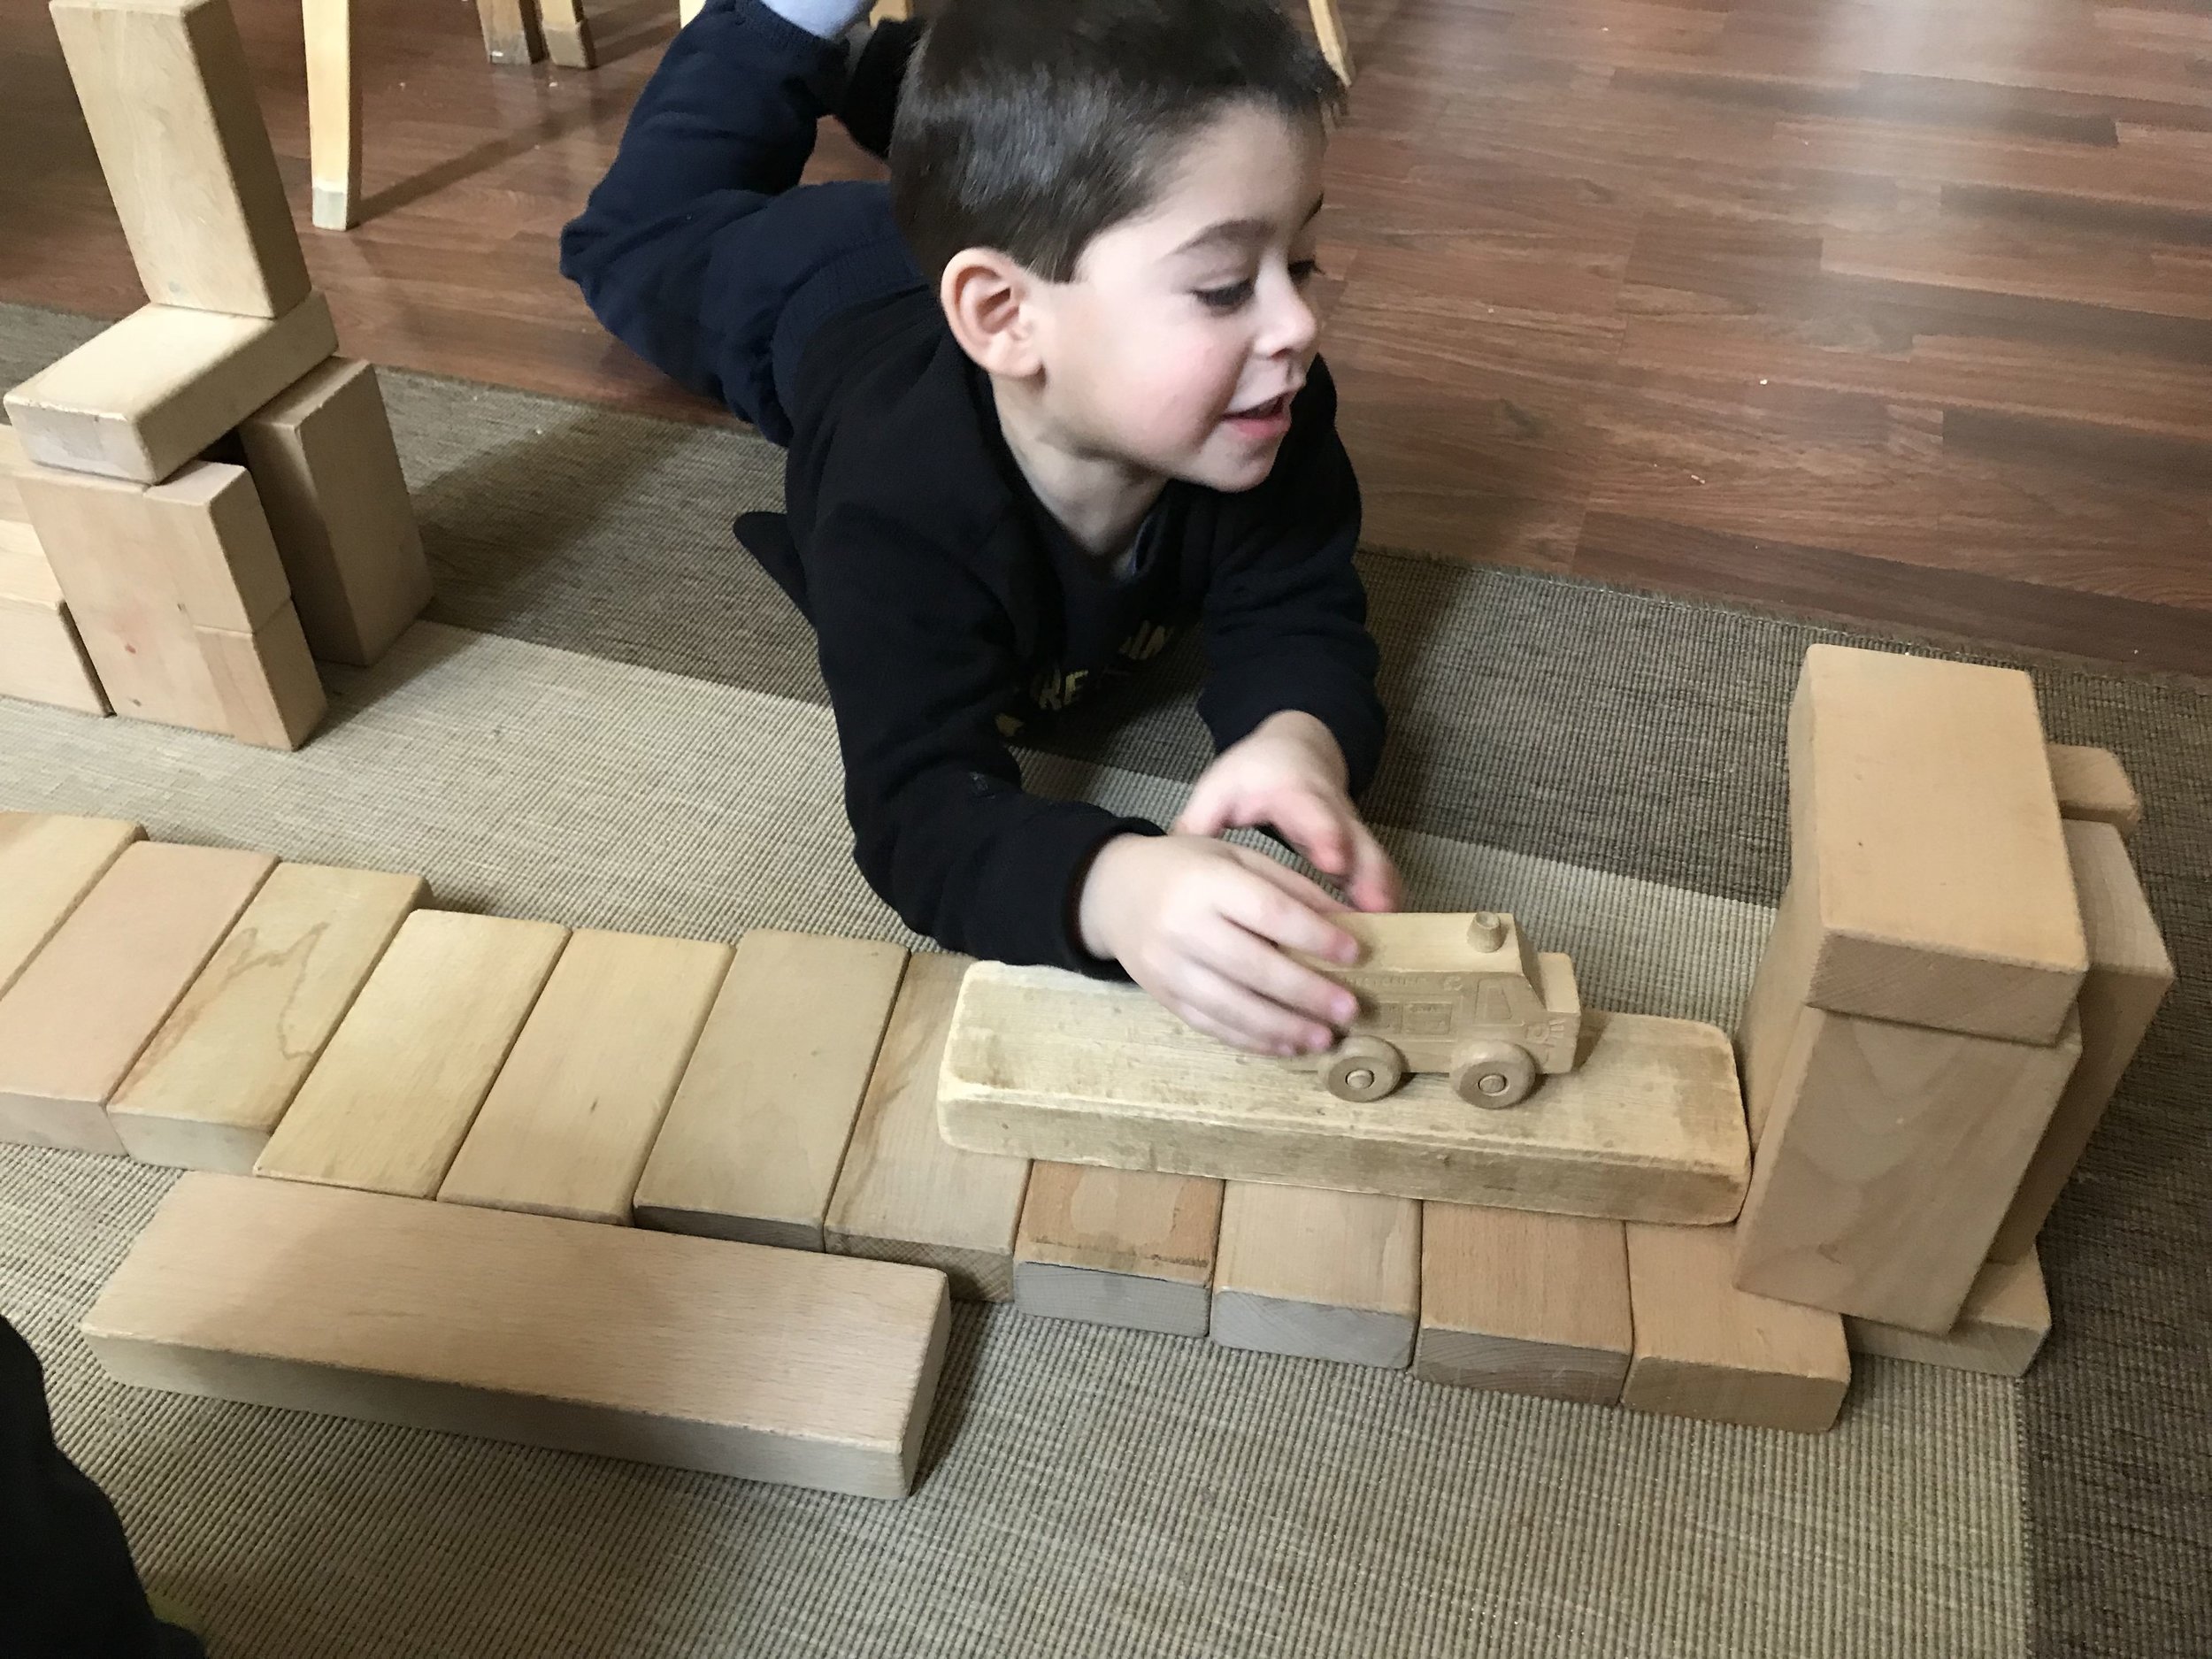  Dylan remembered that at the last workshop he made an airport.&nbsp; This time he made another airport, but with a pathway for cars to enter. 